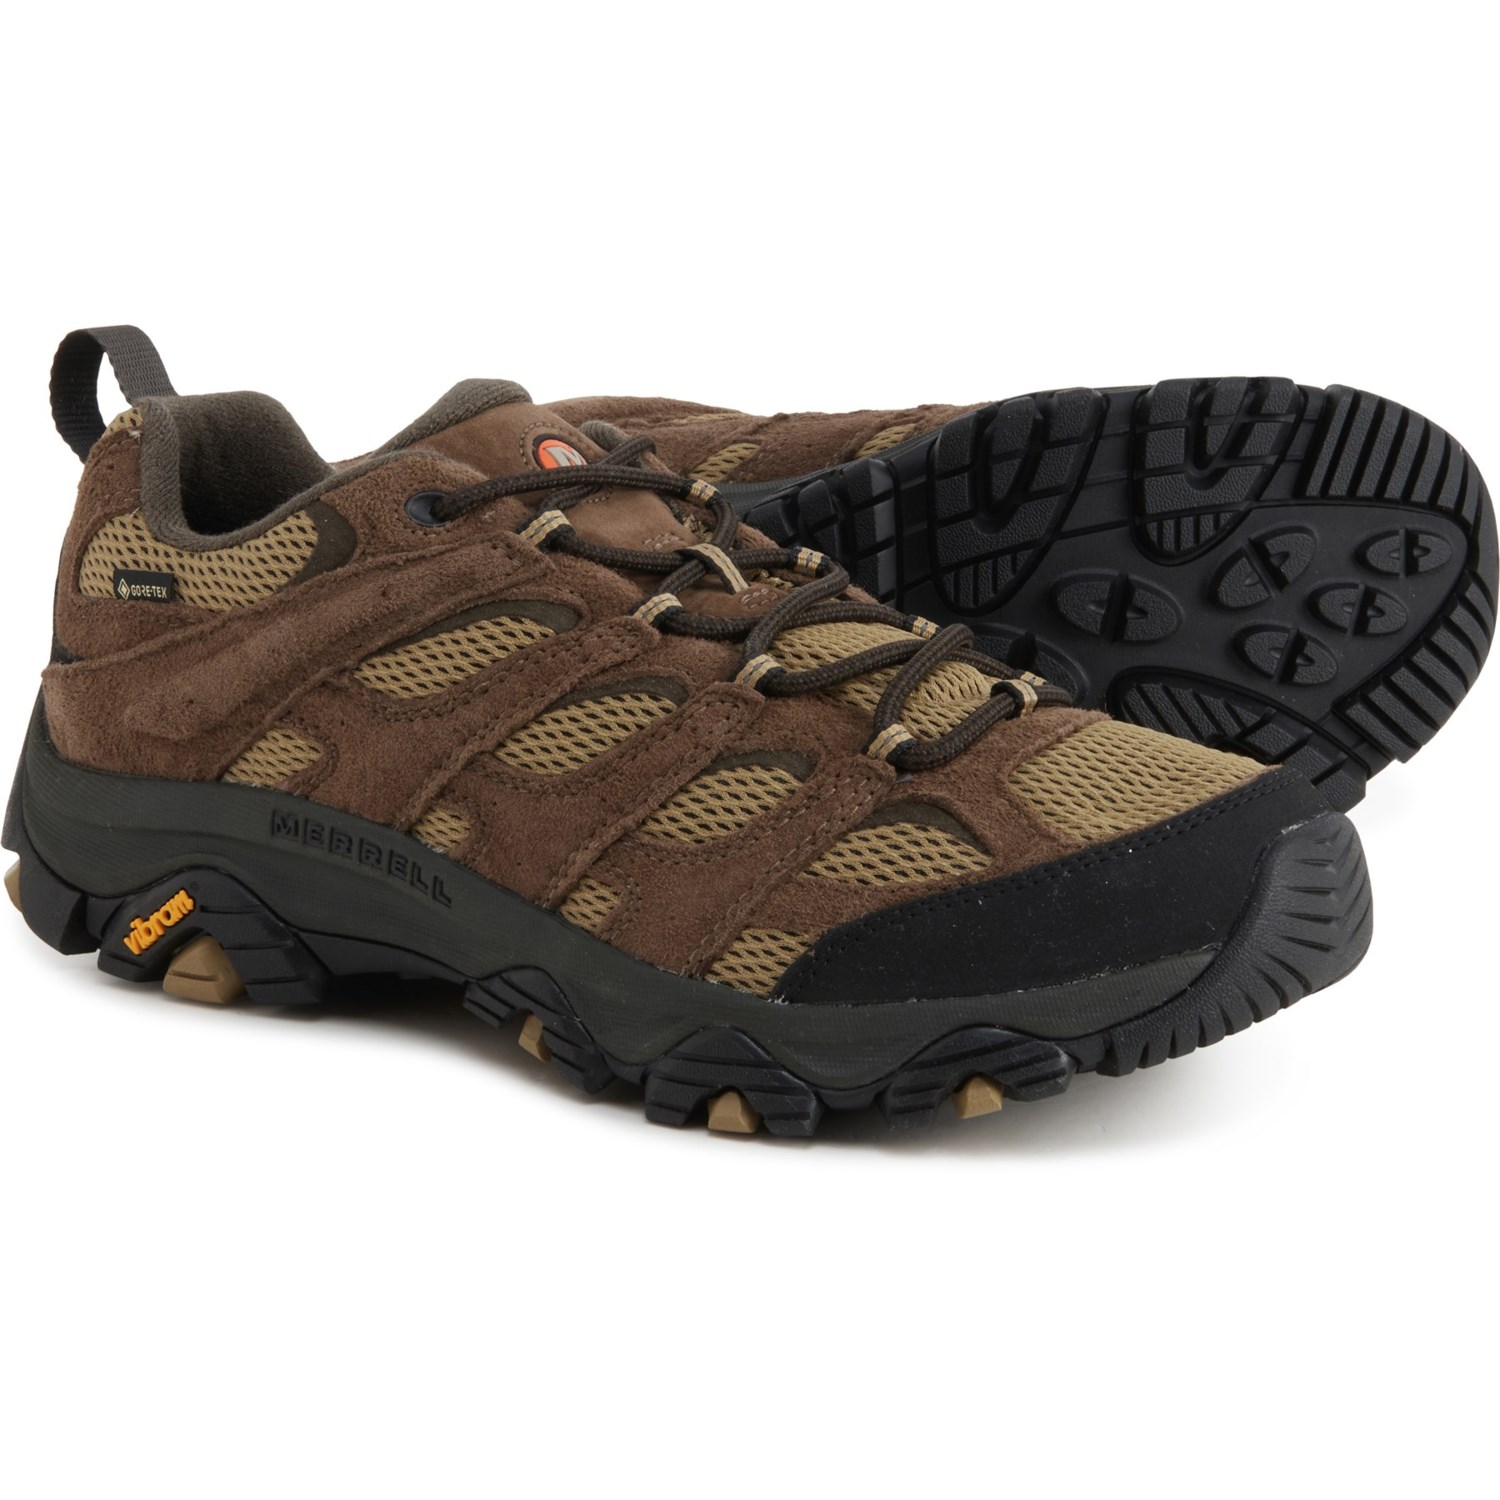 Merrell Moab 3 Gore-Tex Hiking Shoes - Waterproof, Suede (For Men)